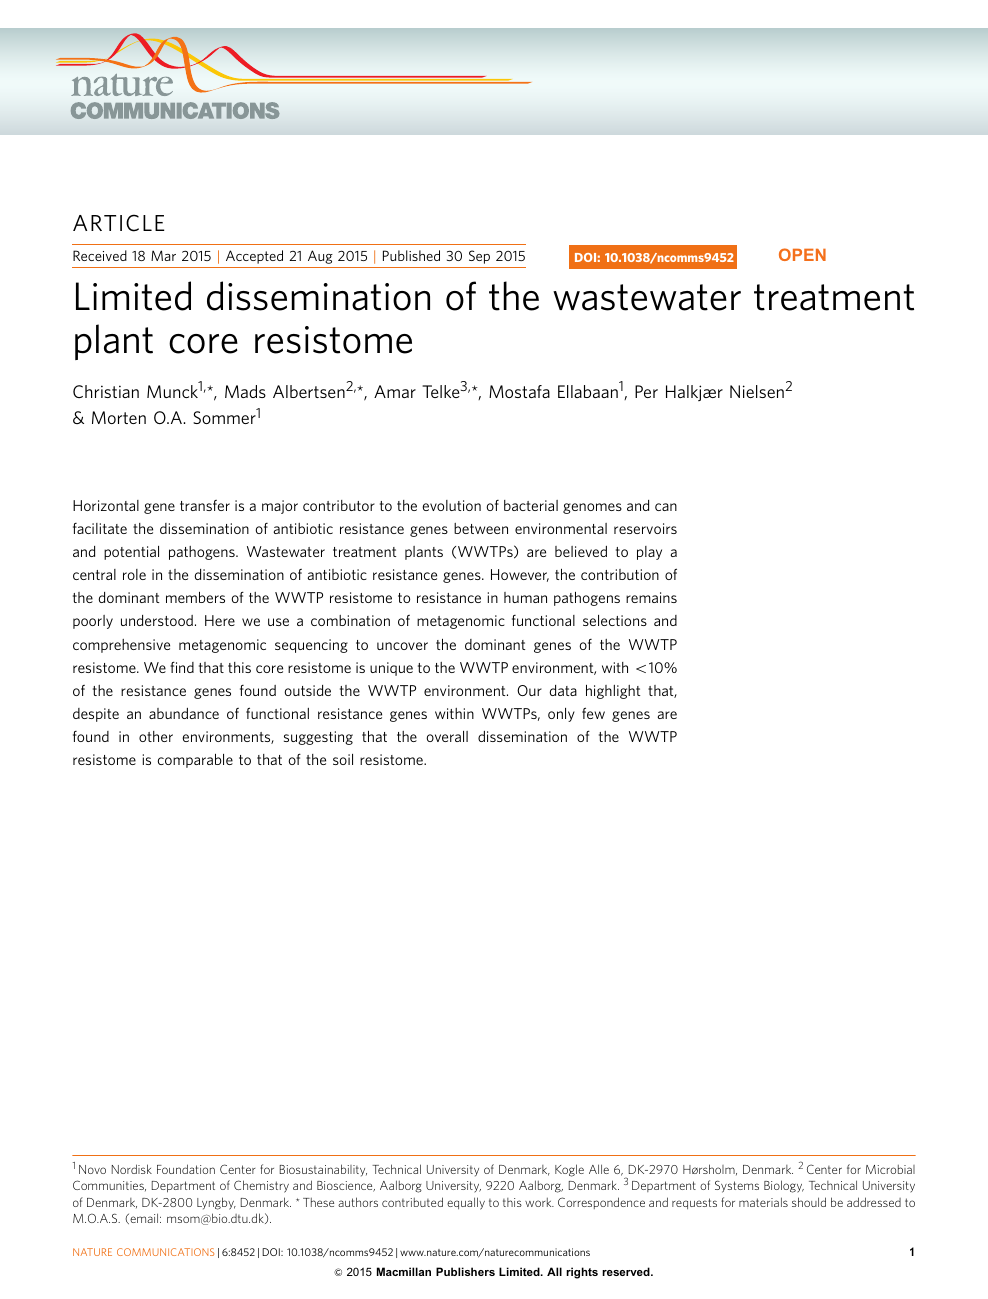 Limited dissemination of wastewater treatment plant core resistome – topic of research paper Biological sciences. Download scholarly PDF and read for free on CyberLeninka open science hub.